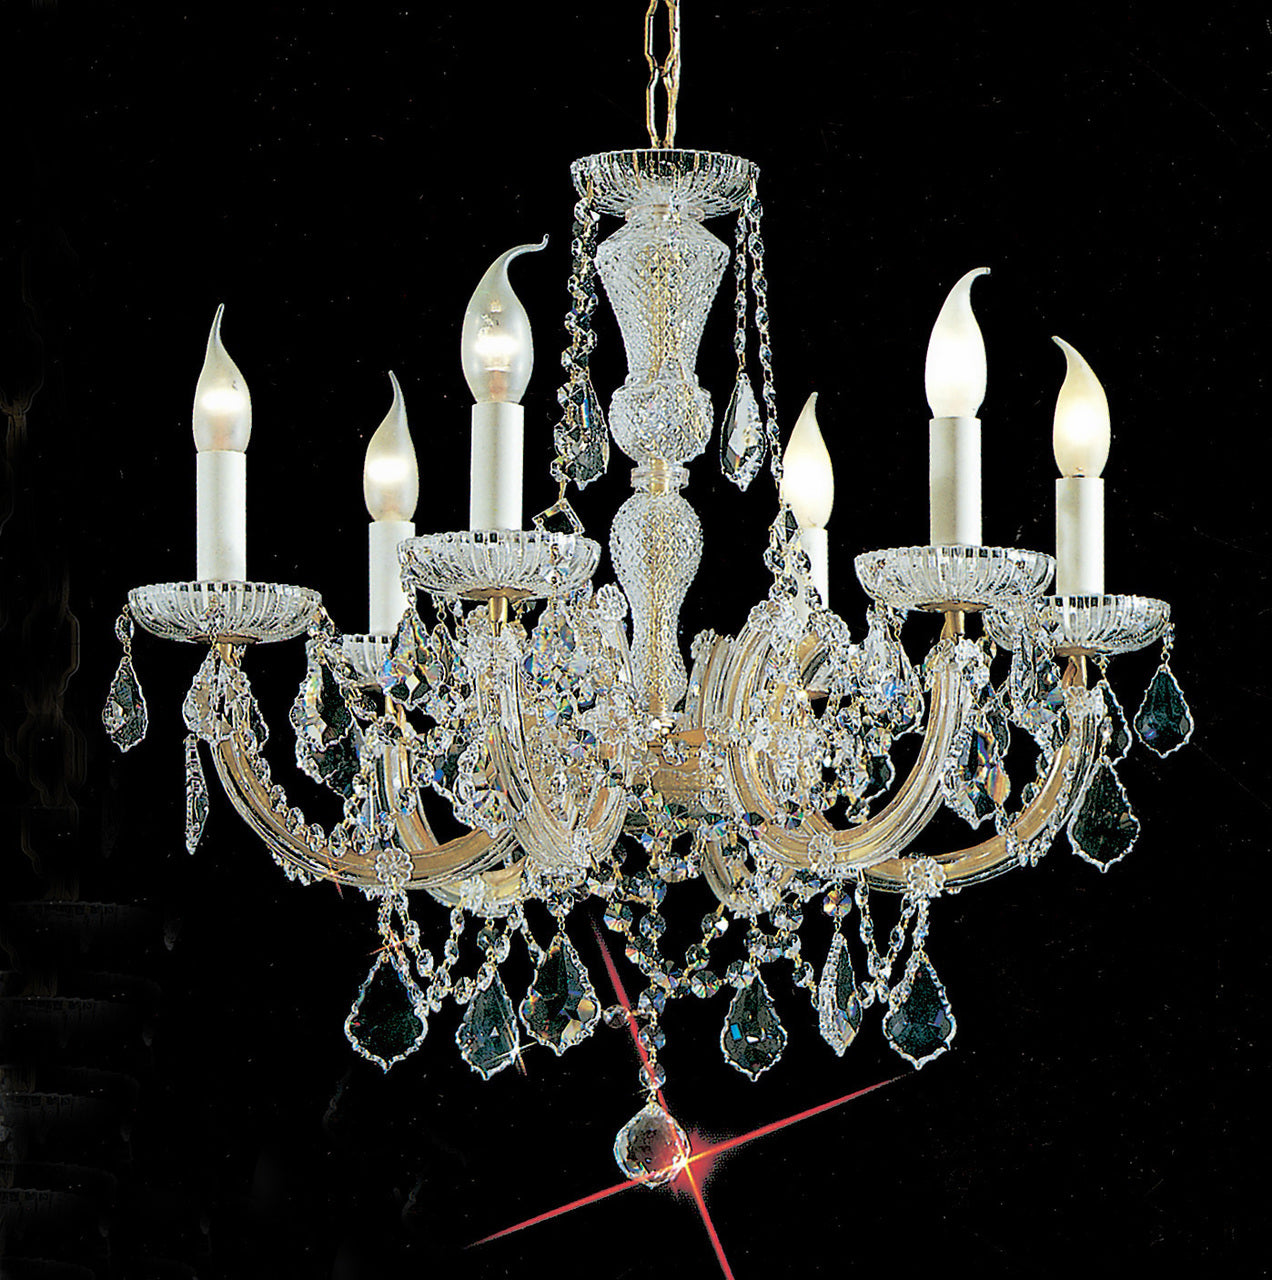 Classic Lighting 8106 OWG S Maria Theresa Traditional Crystal Chandelier in Olde World Gold (Imported from Italy)